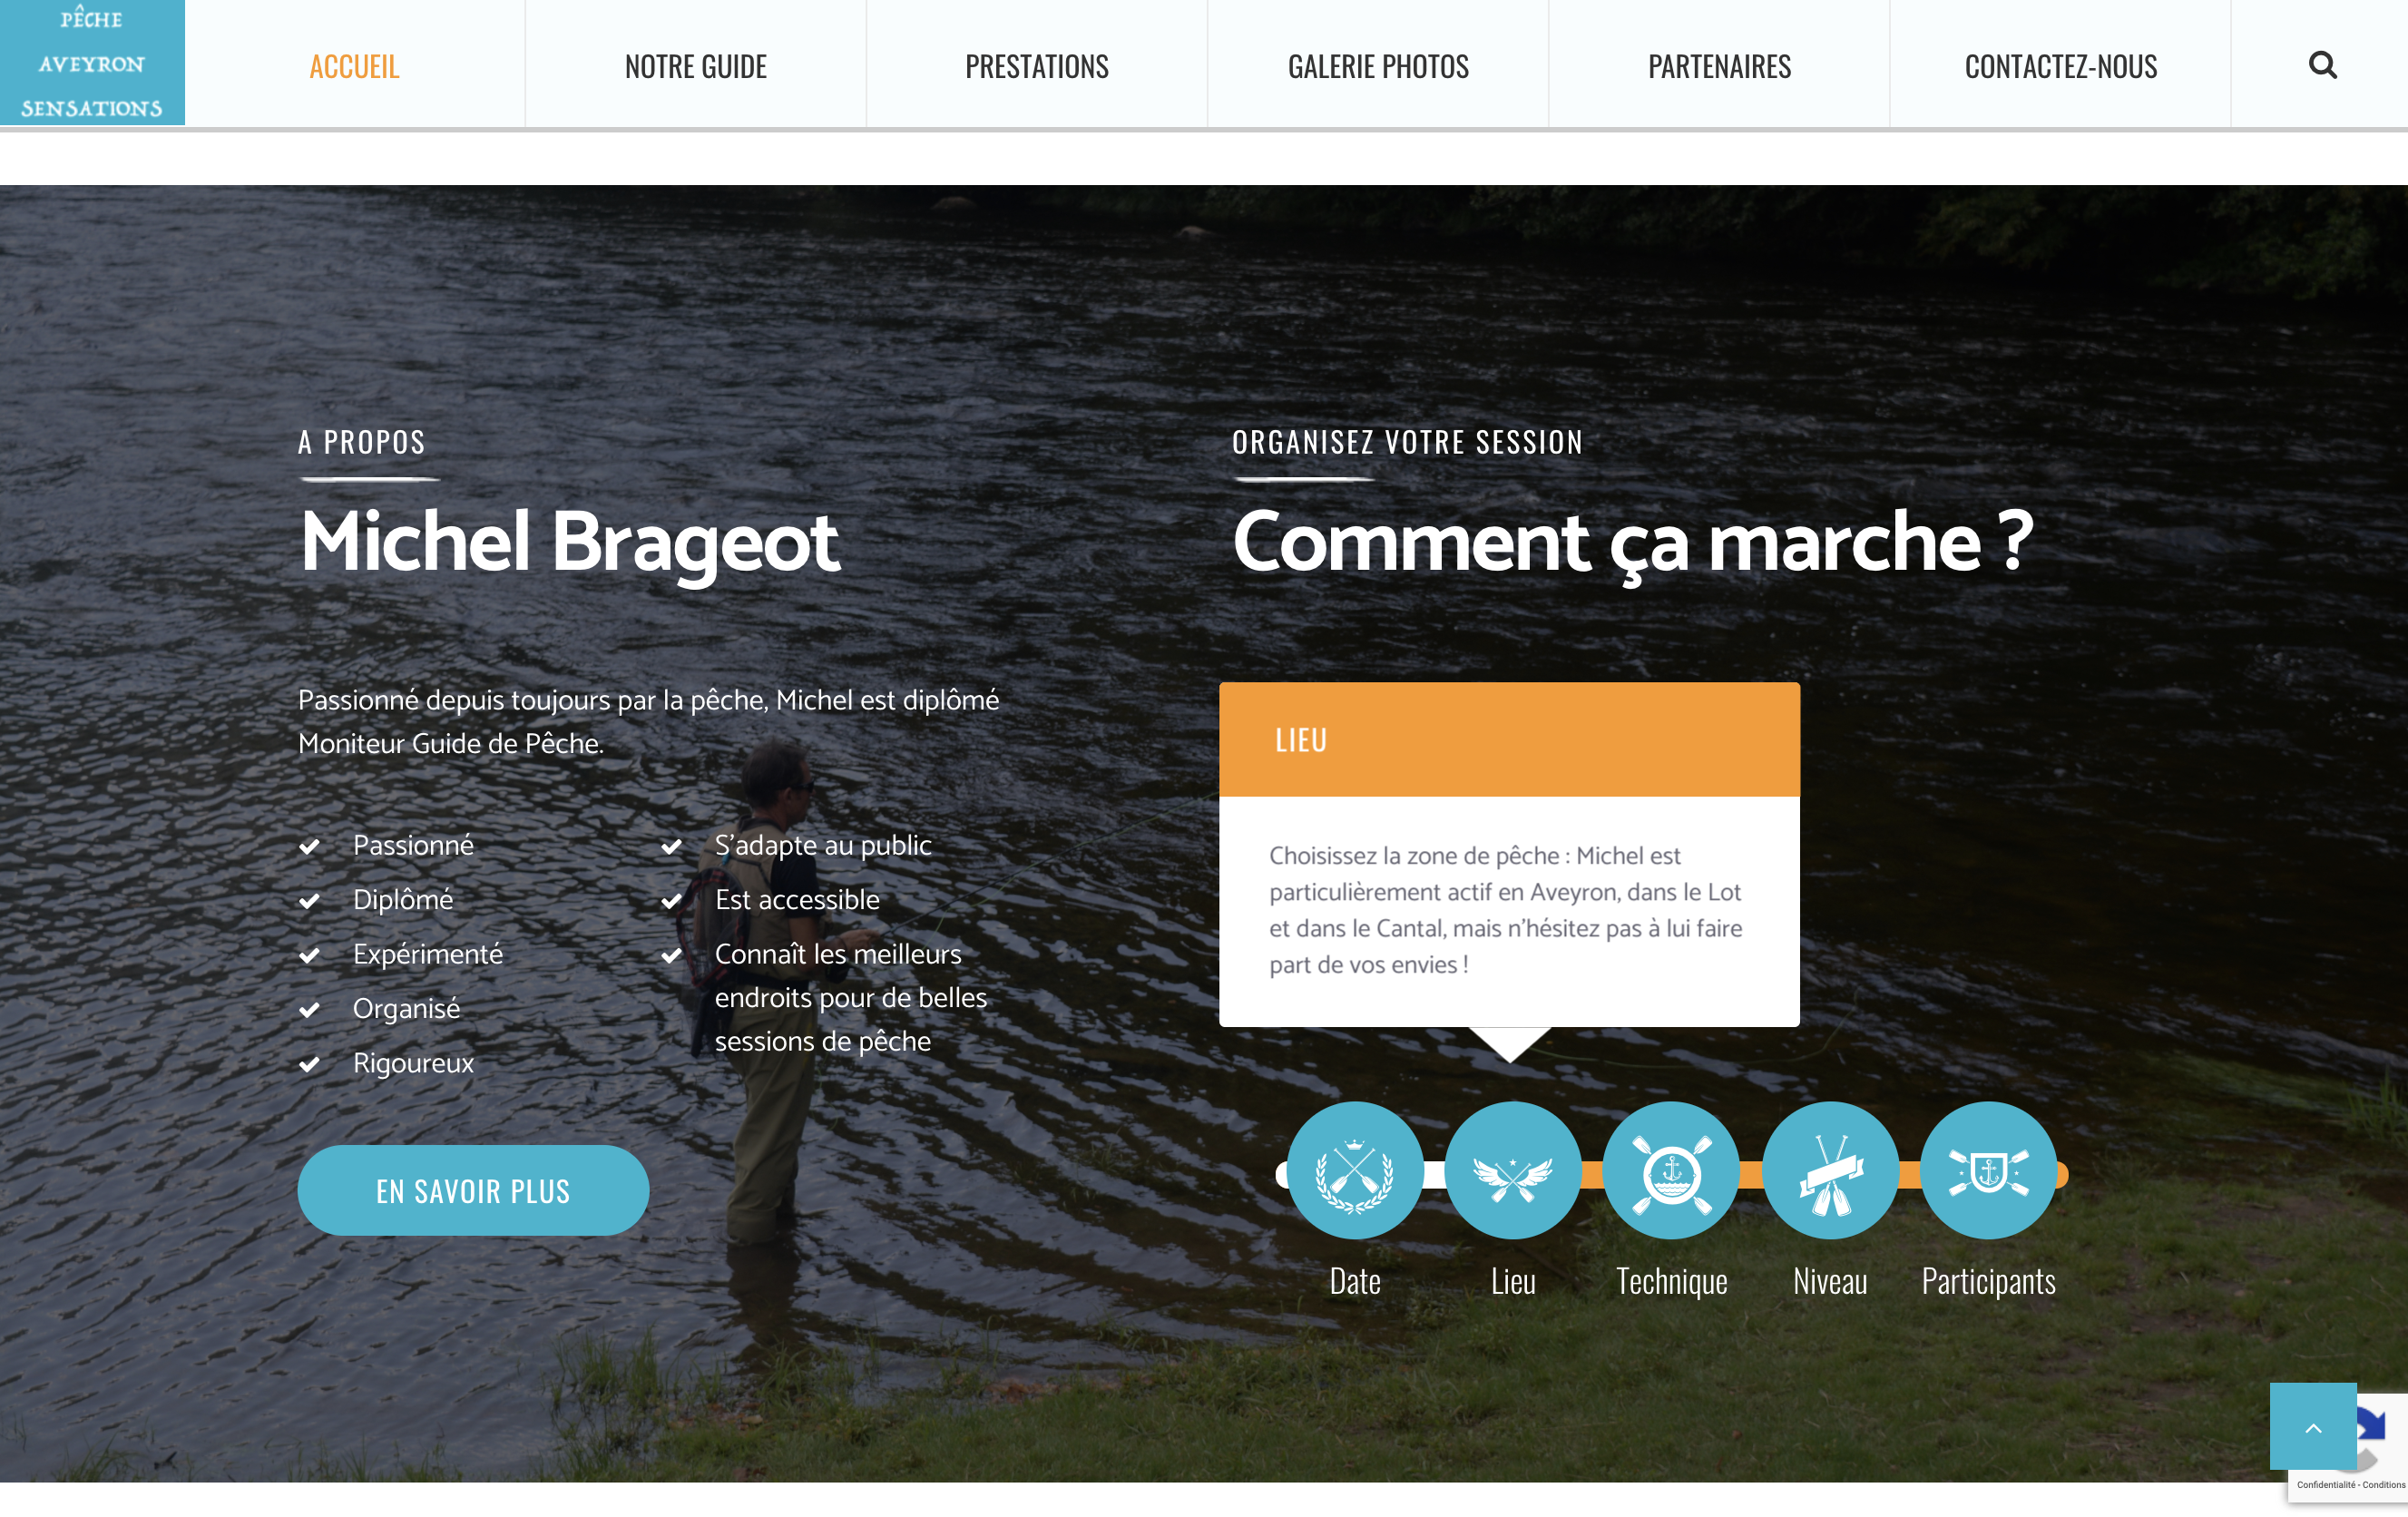 LastShore developed a low cost website for a highly trained fisherman